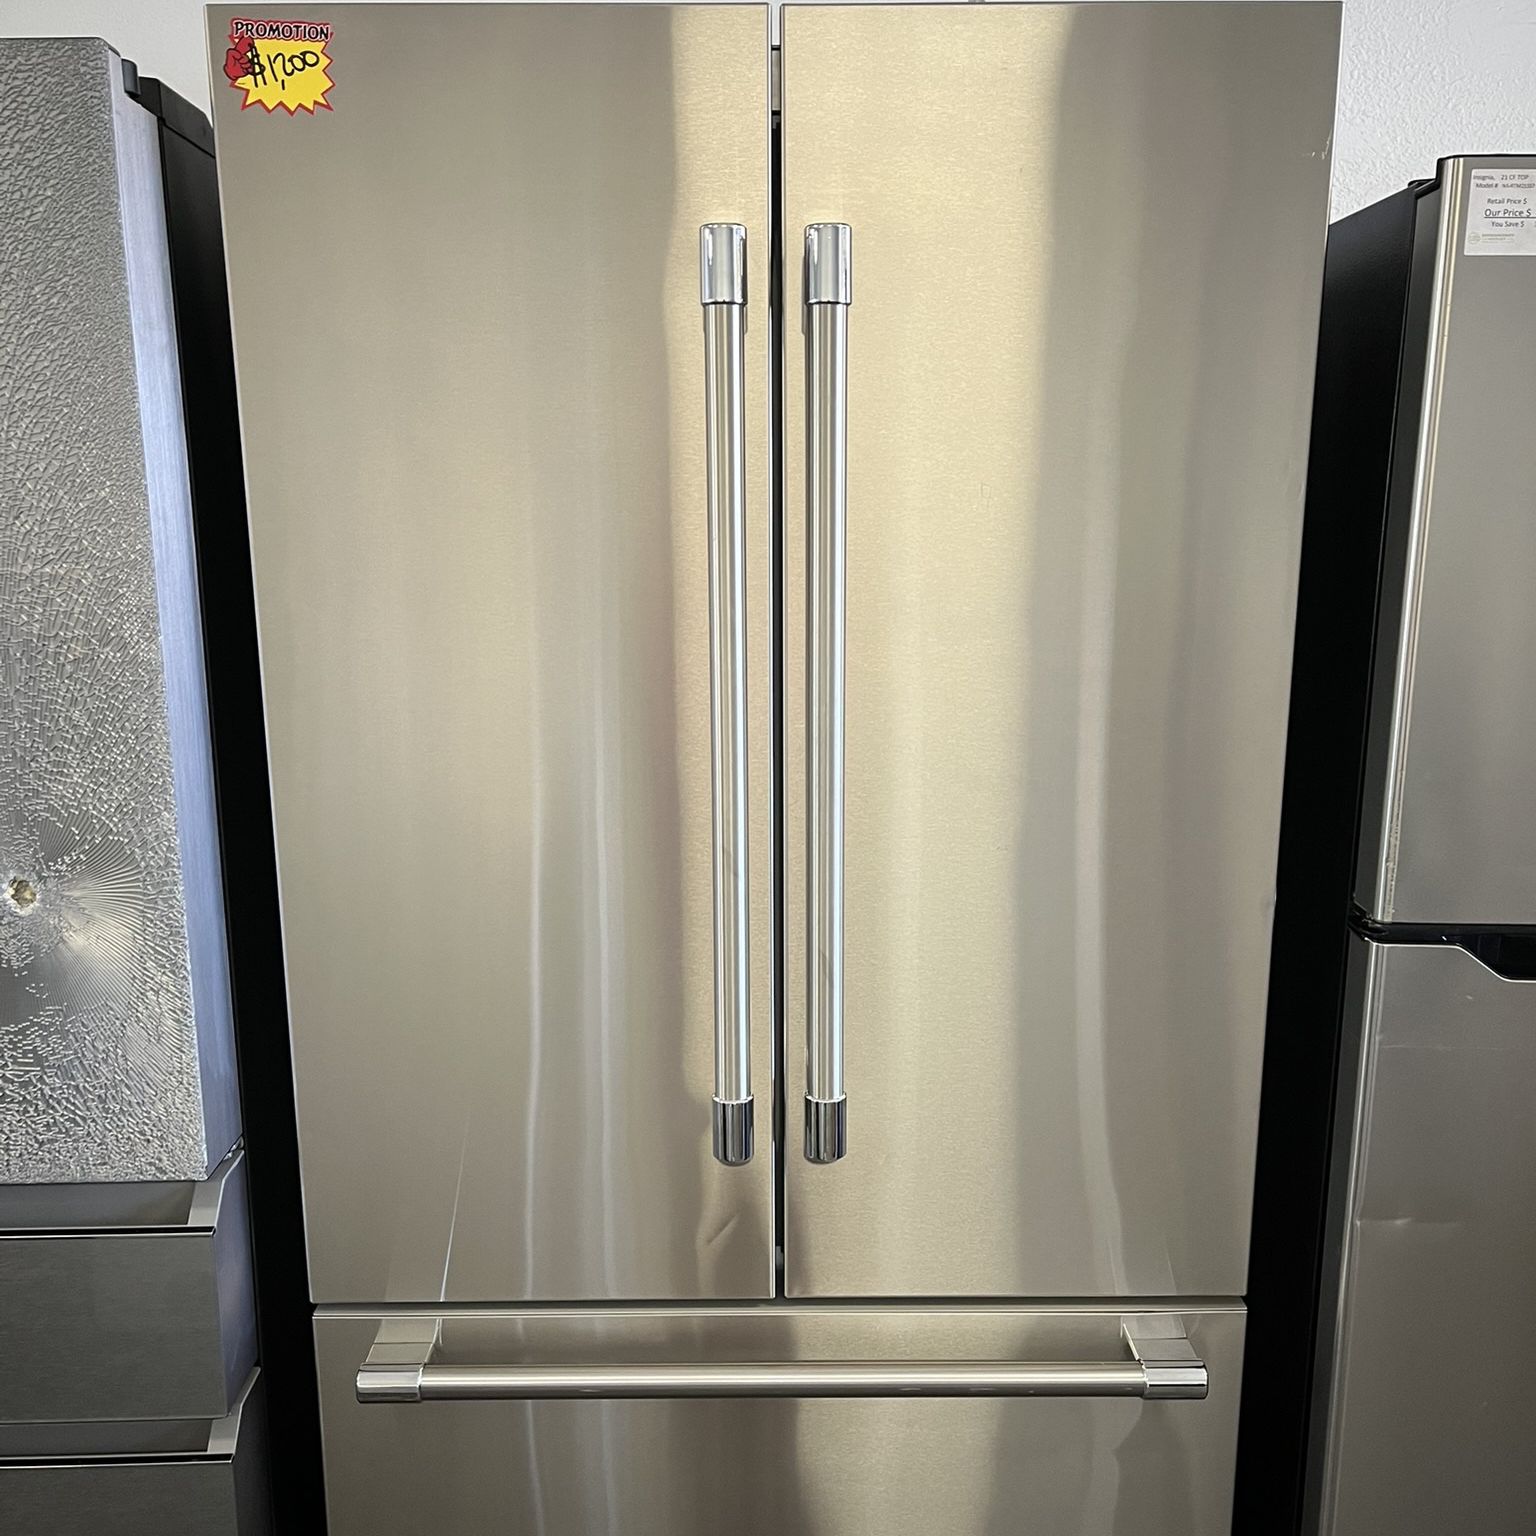 ‼️‼️ Thermador French Door Refrigerator Stainless Steel Counter Depth Refrigerator ‼️‼️